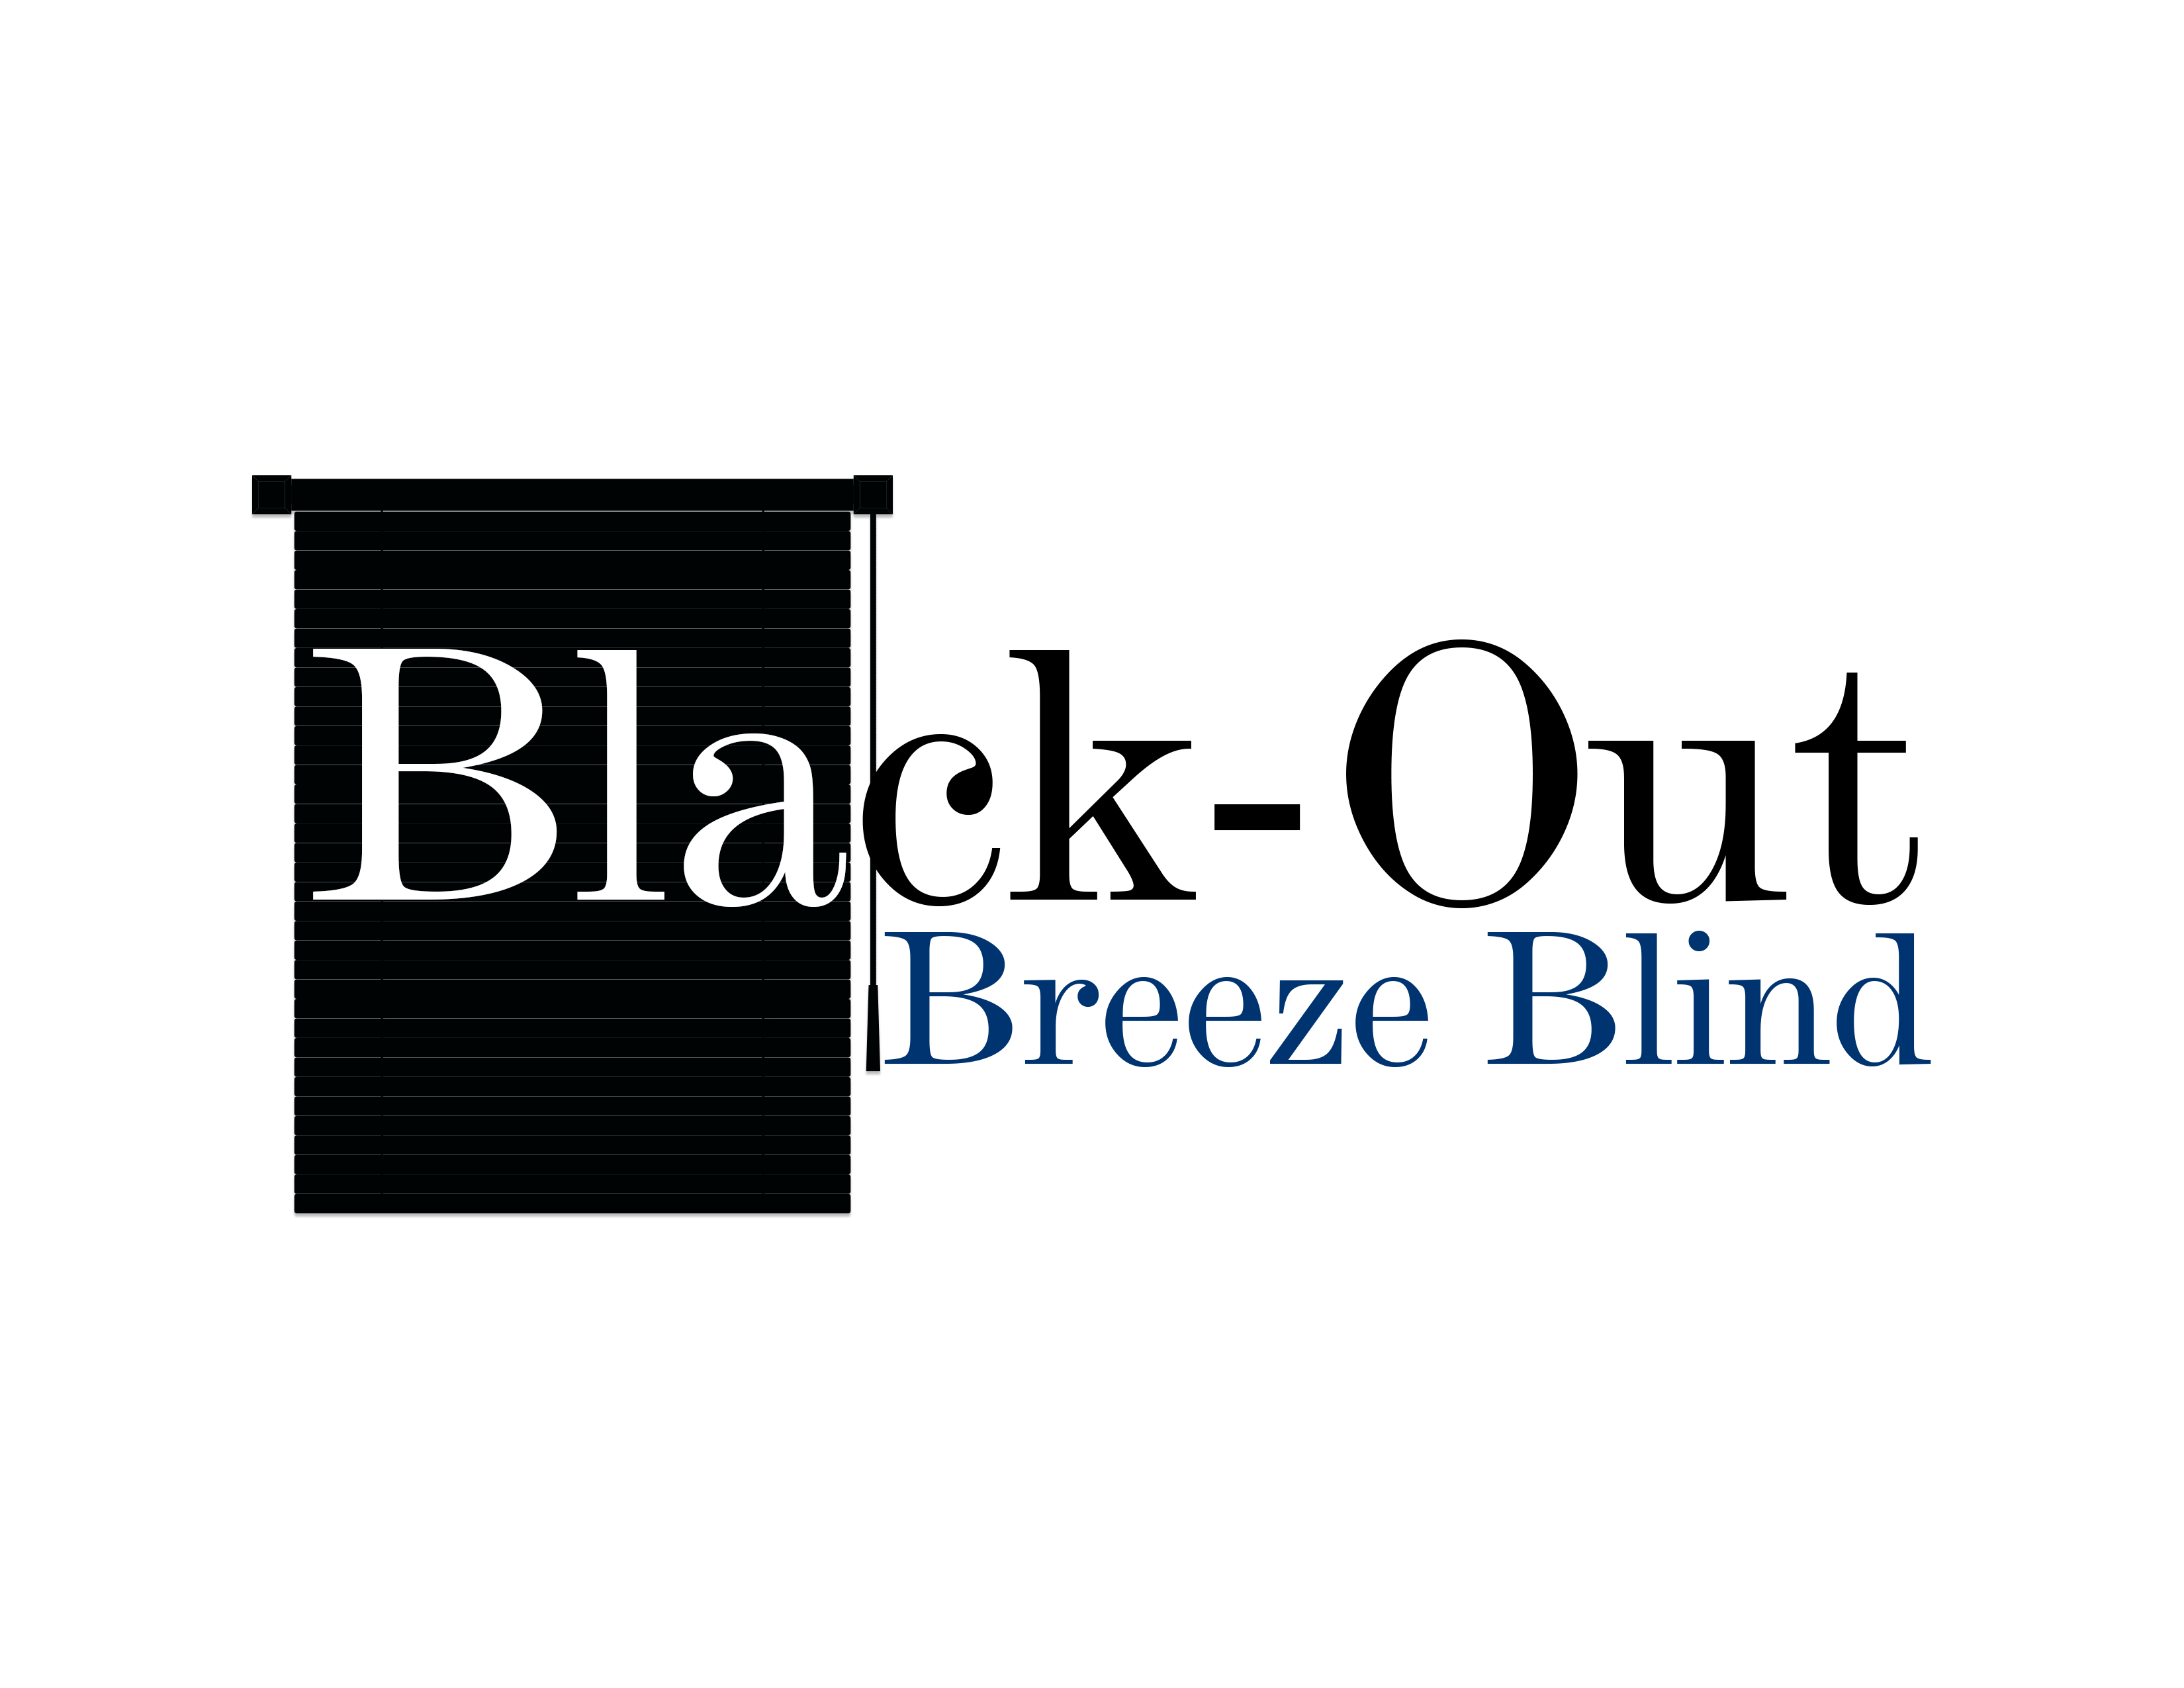 The Black Out Breeze Blinds were invented to create a completely dark environment to help people sleep.